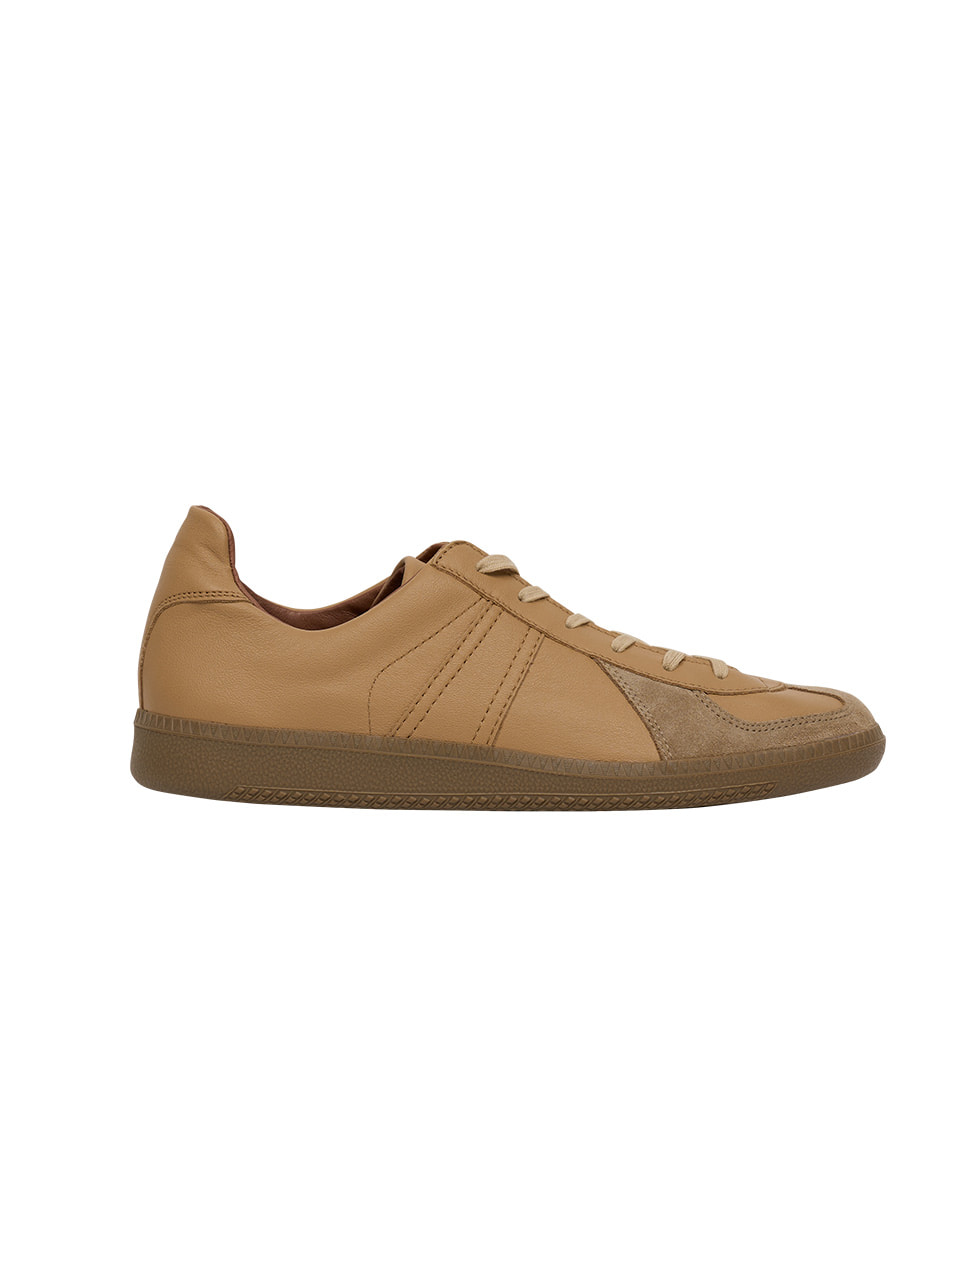 REPRODUCTION OF FOUND - GERMAN MILITARY TRAINER 1700L (LIGHT BEIGE)